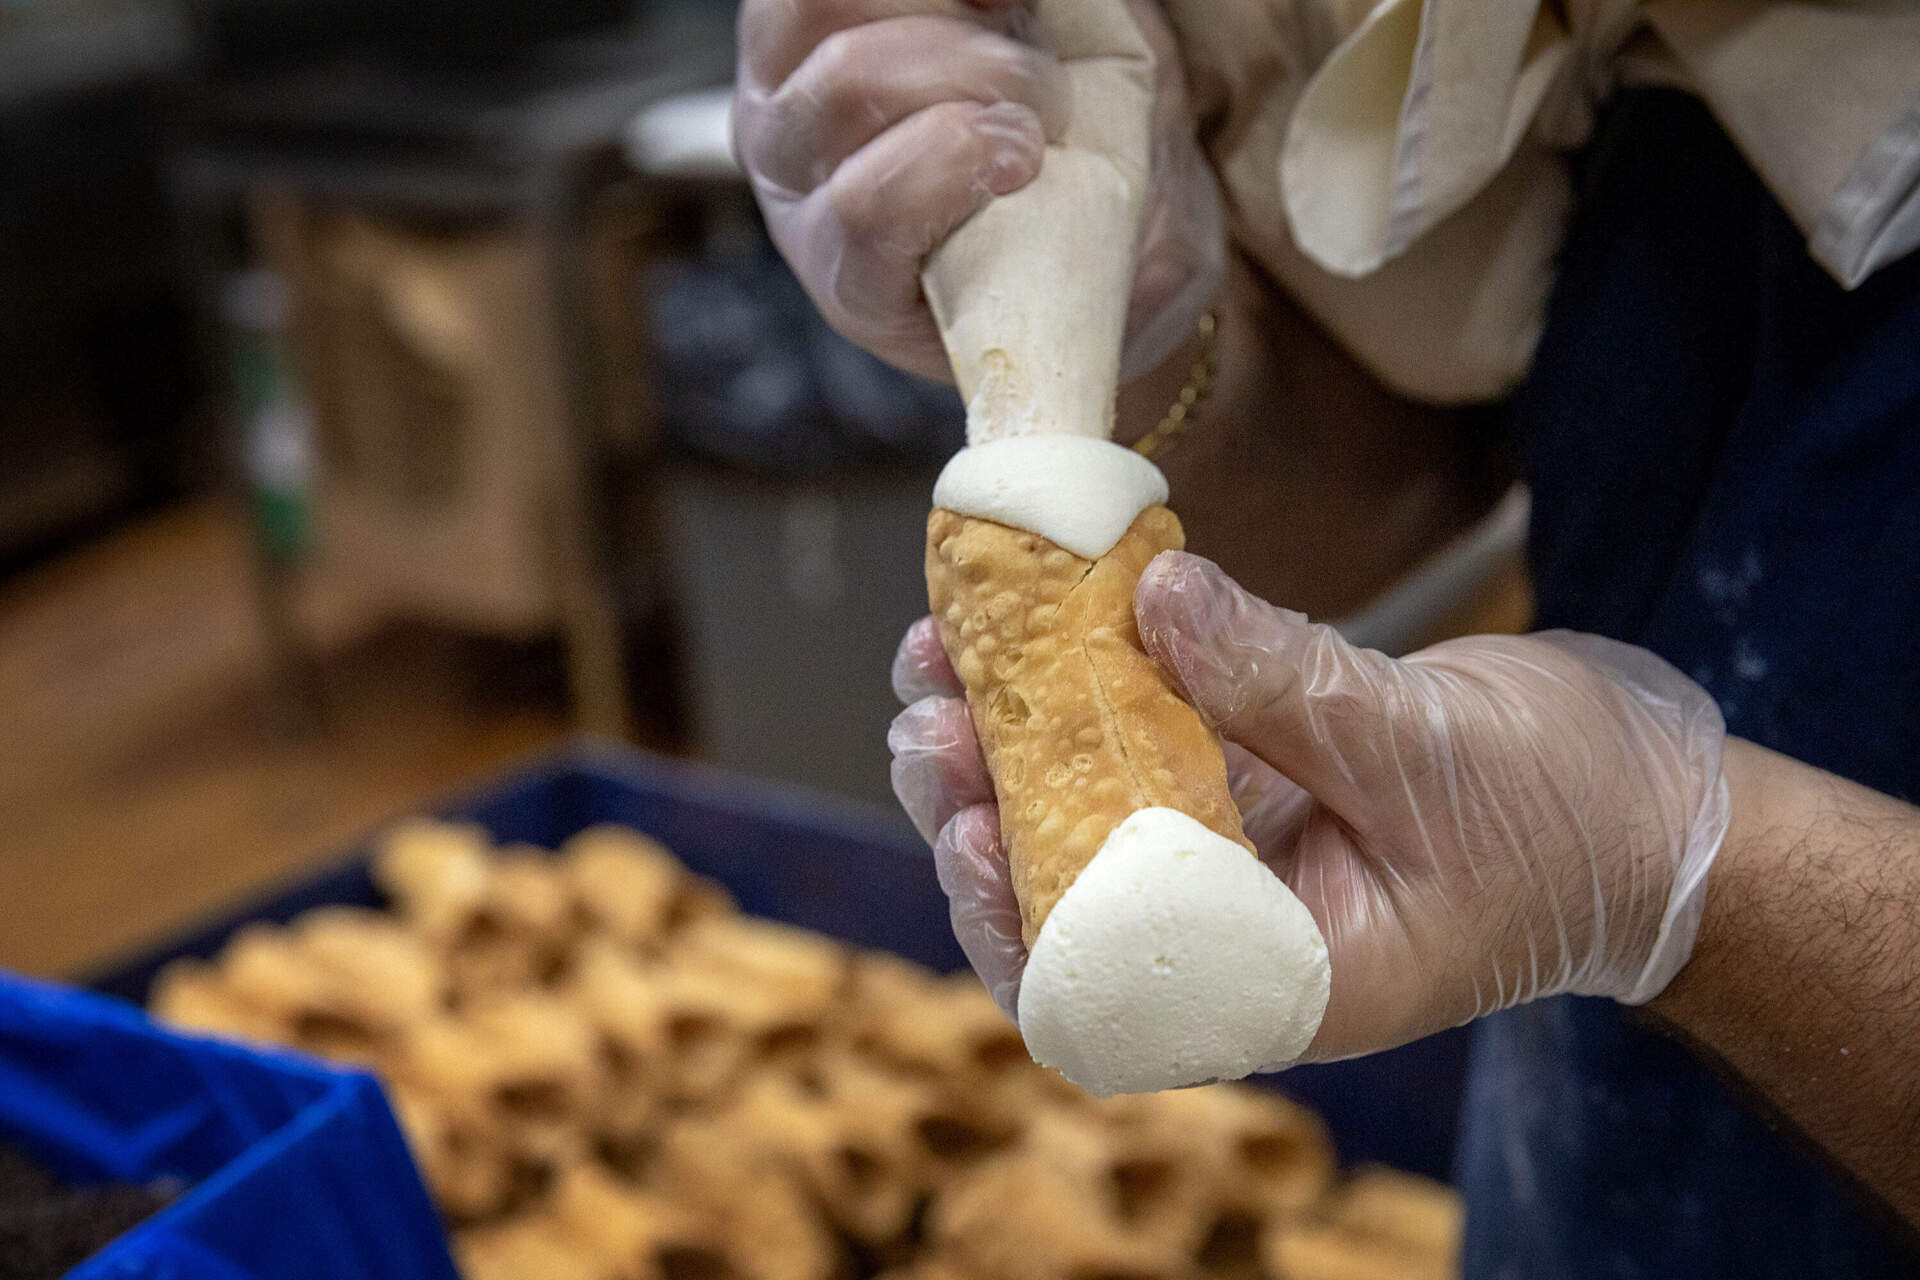 A cannoli (or cannolo if you want to be grammatically correct) gets filled in the kitchen of Mike's Pastry in Boston's North End. (Robin Lubbock/WBUR)